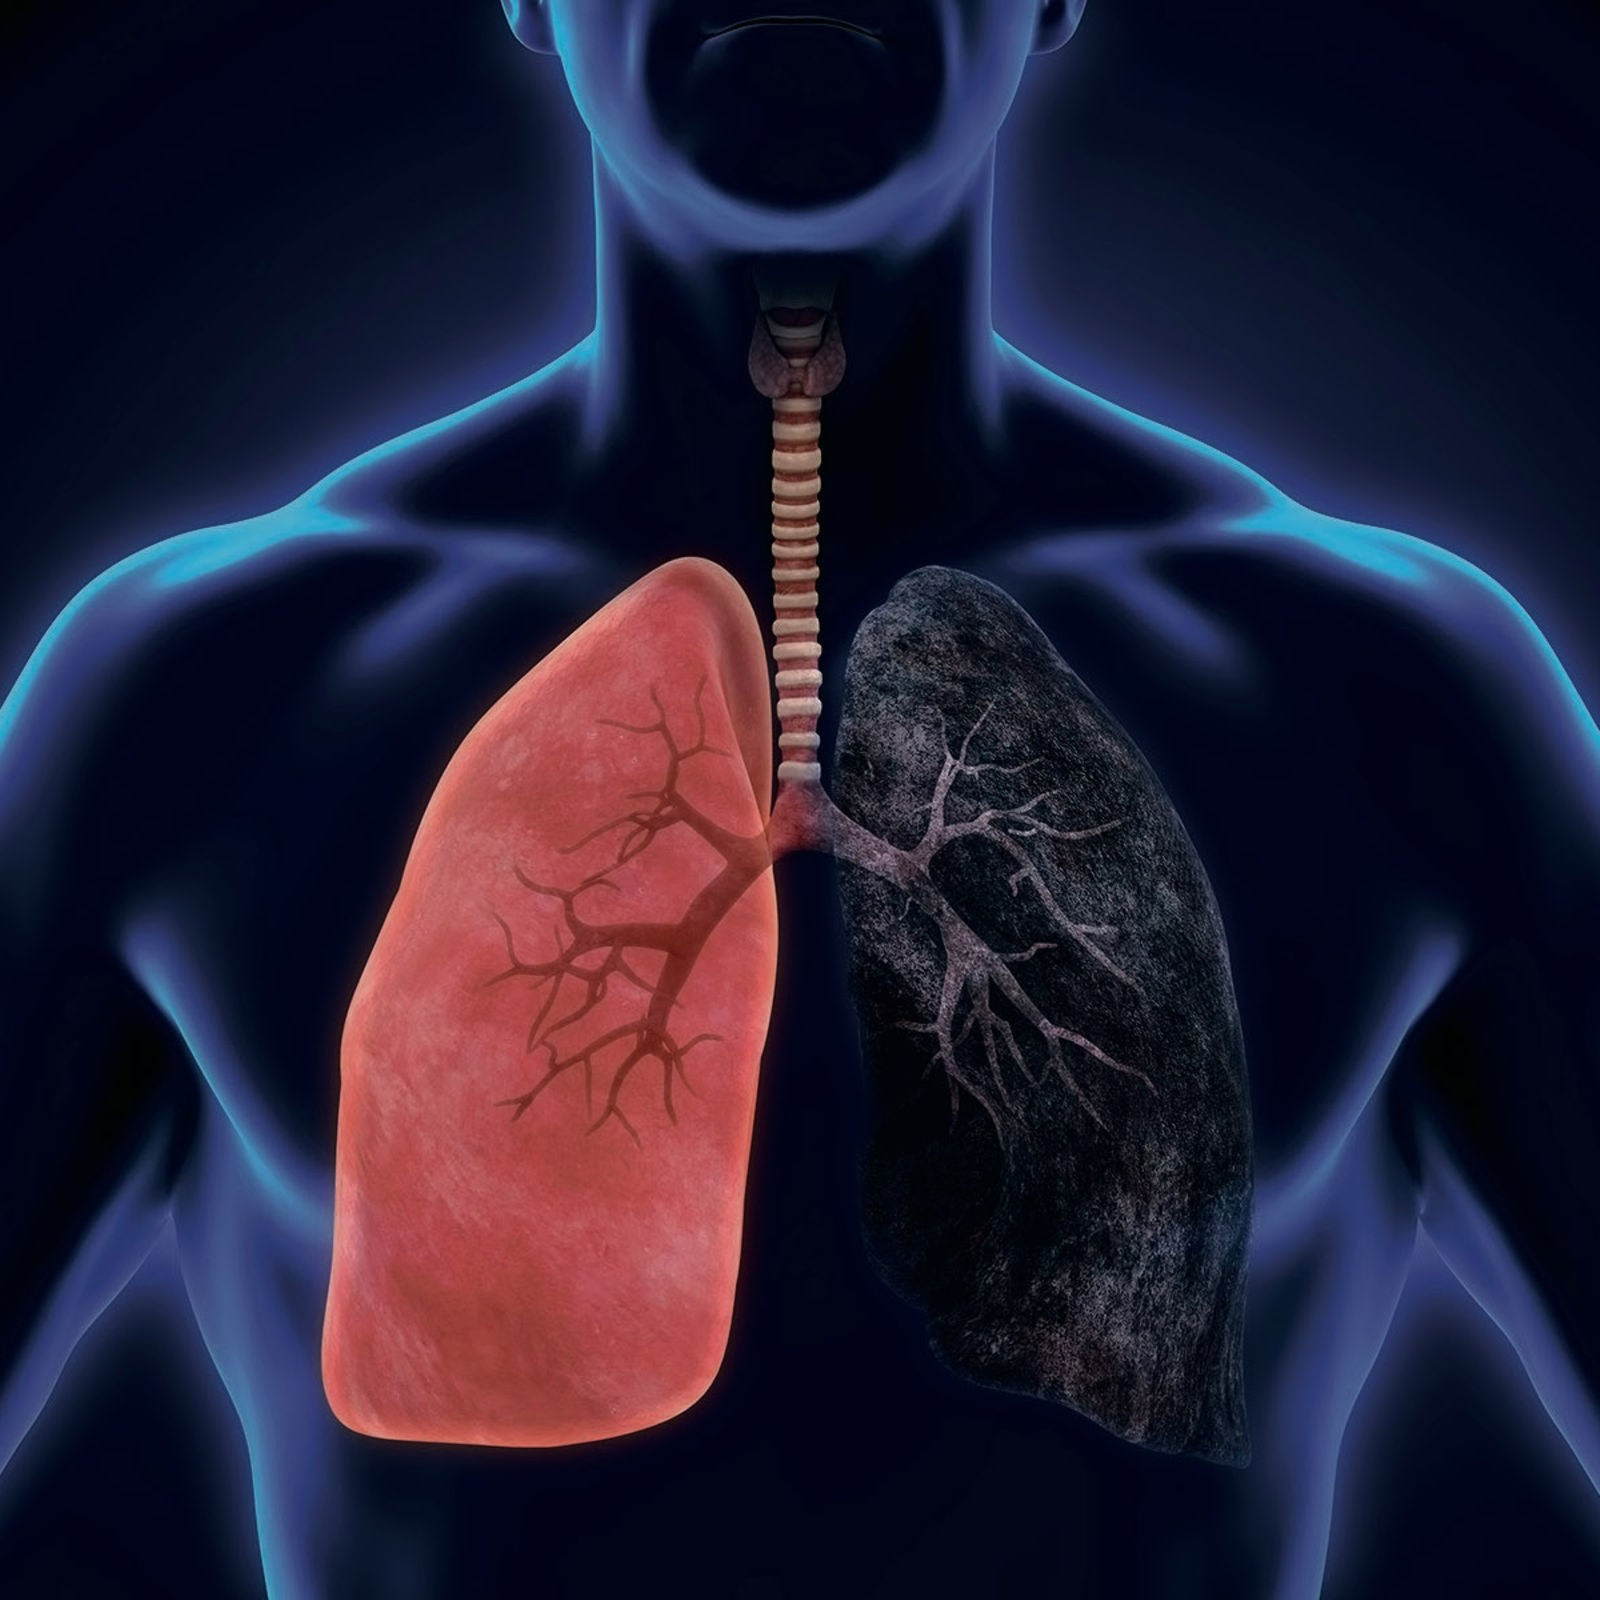 New technique for early lung cancer detection